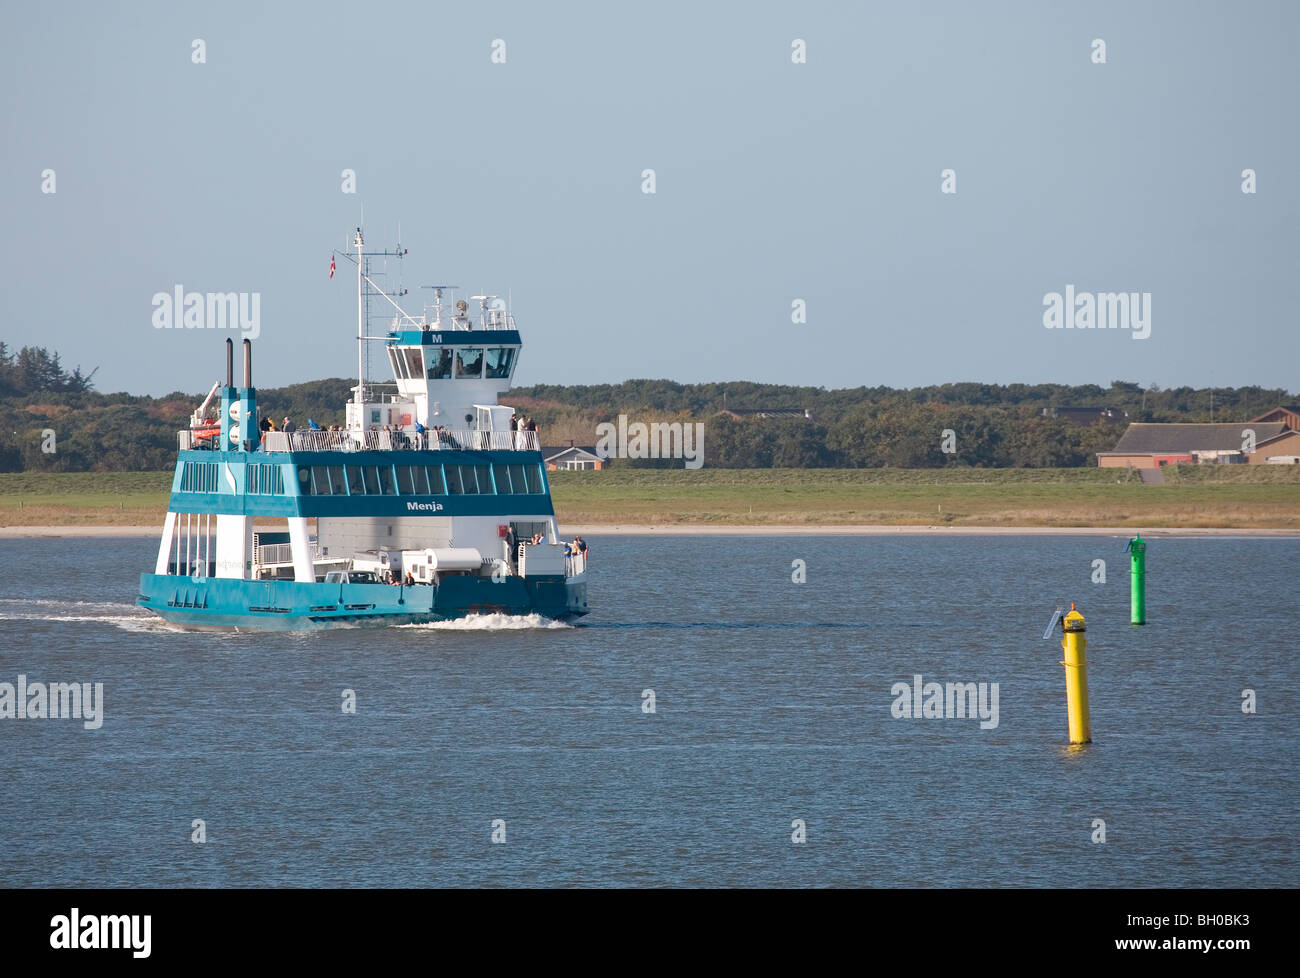 Page 2 - Esbjerg Fanø High Resolution Stock Photography and Images - Alamy